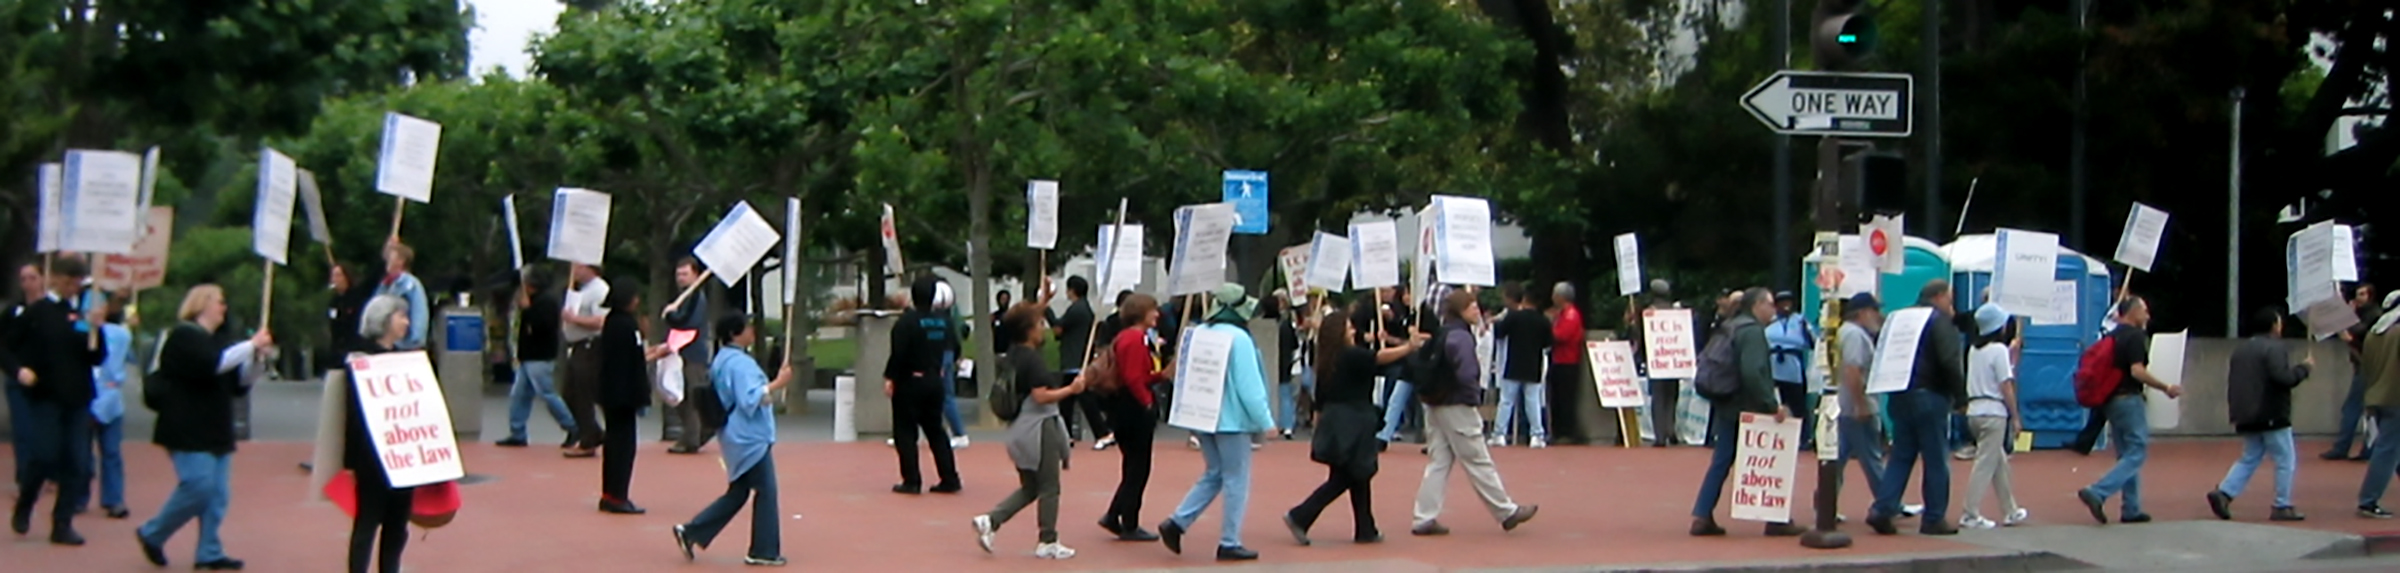 People on the street with placards as part of a 2008 University of California labor strike by the University Professional and Technical Employees, CWA Local 9119.